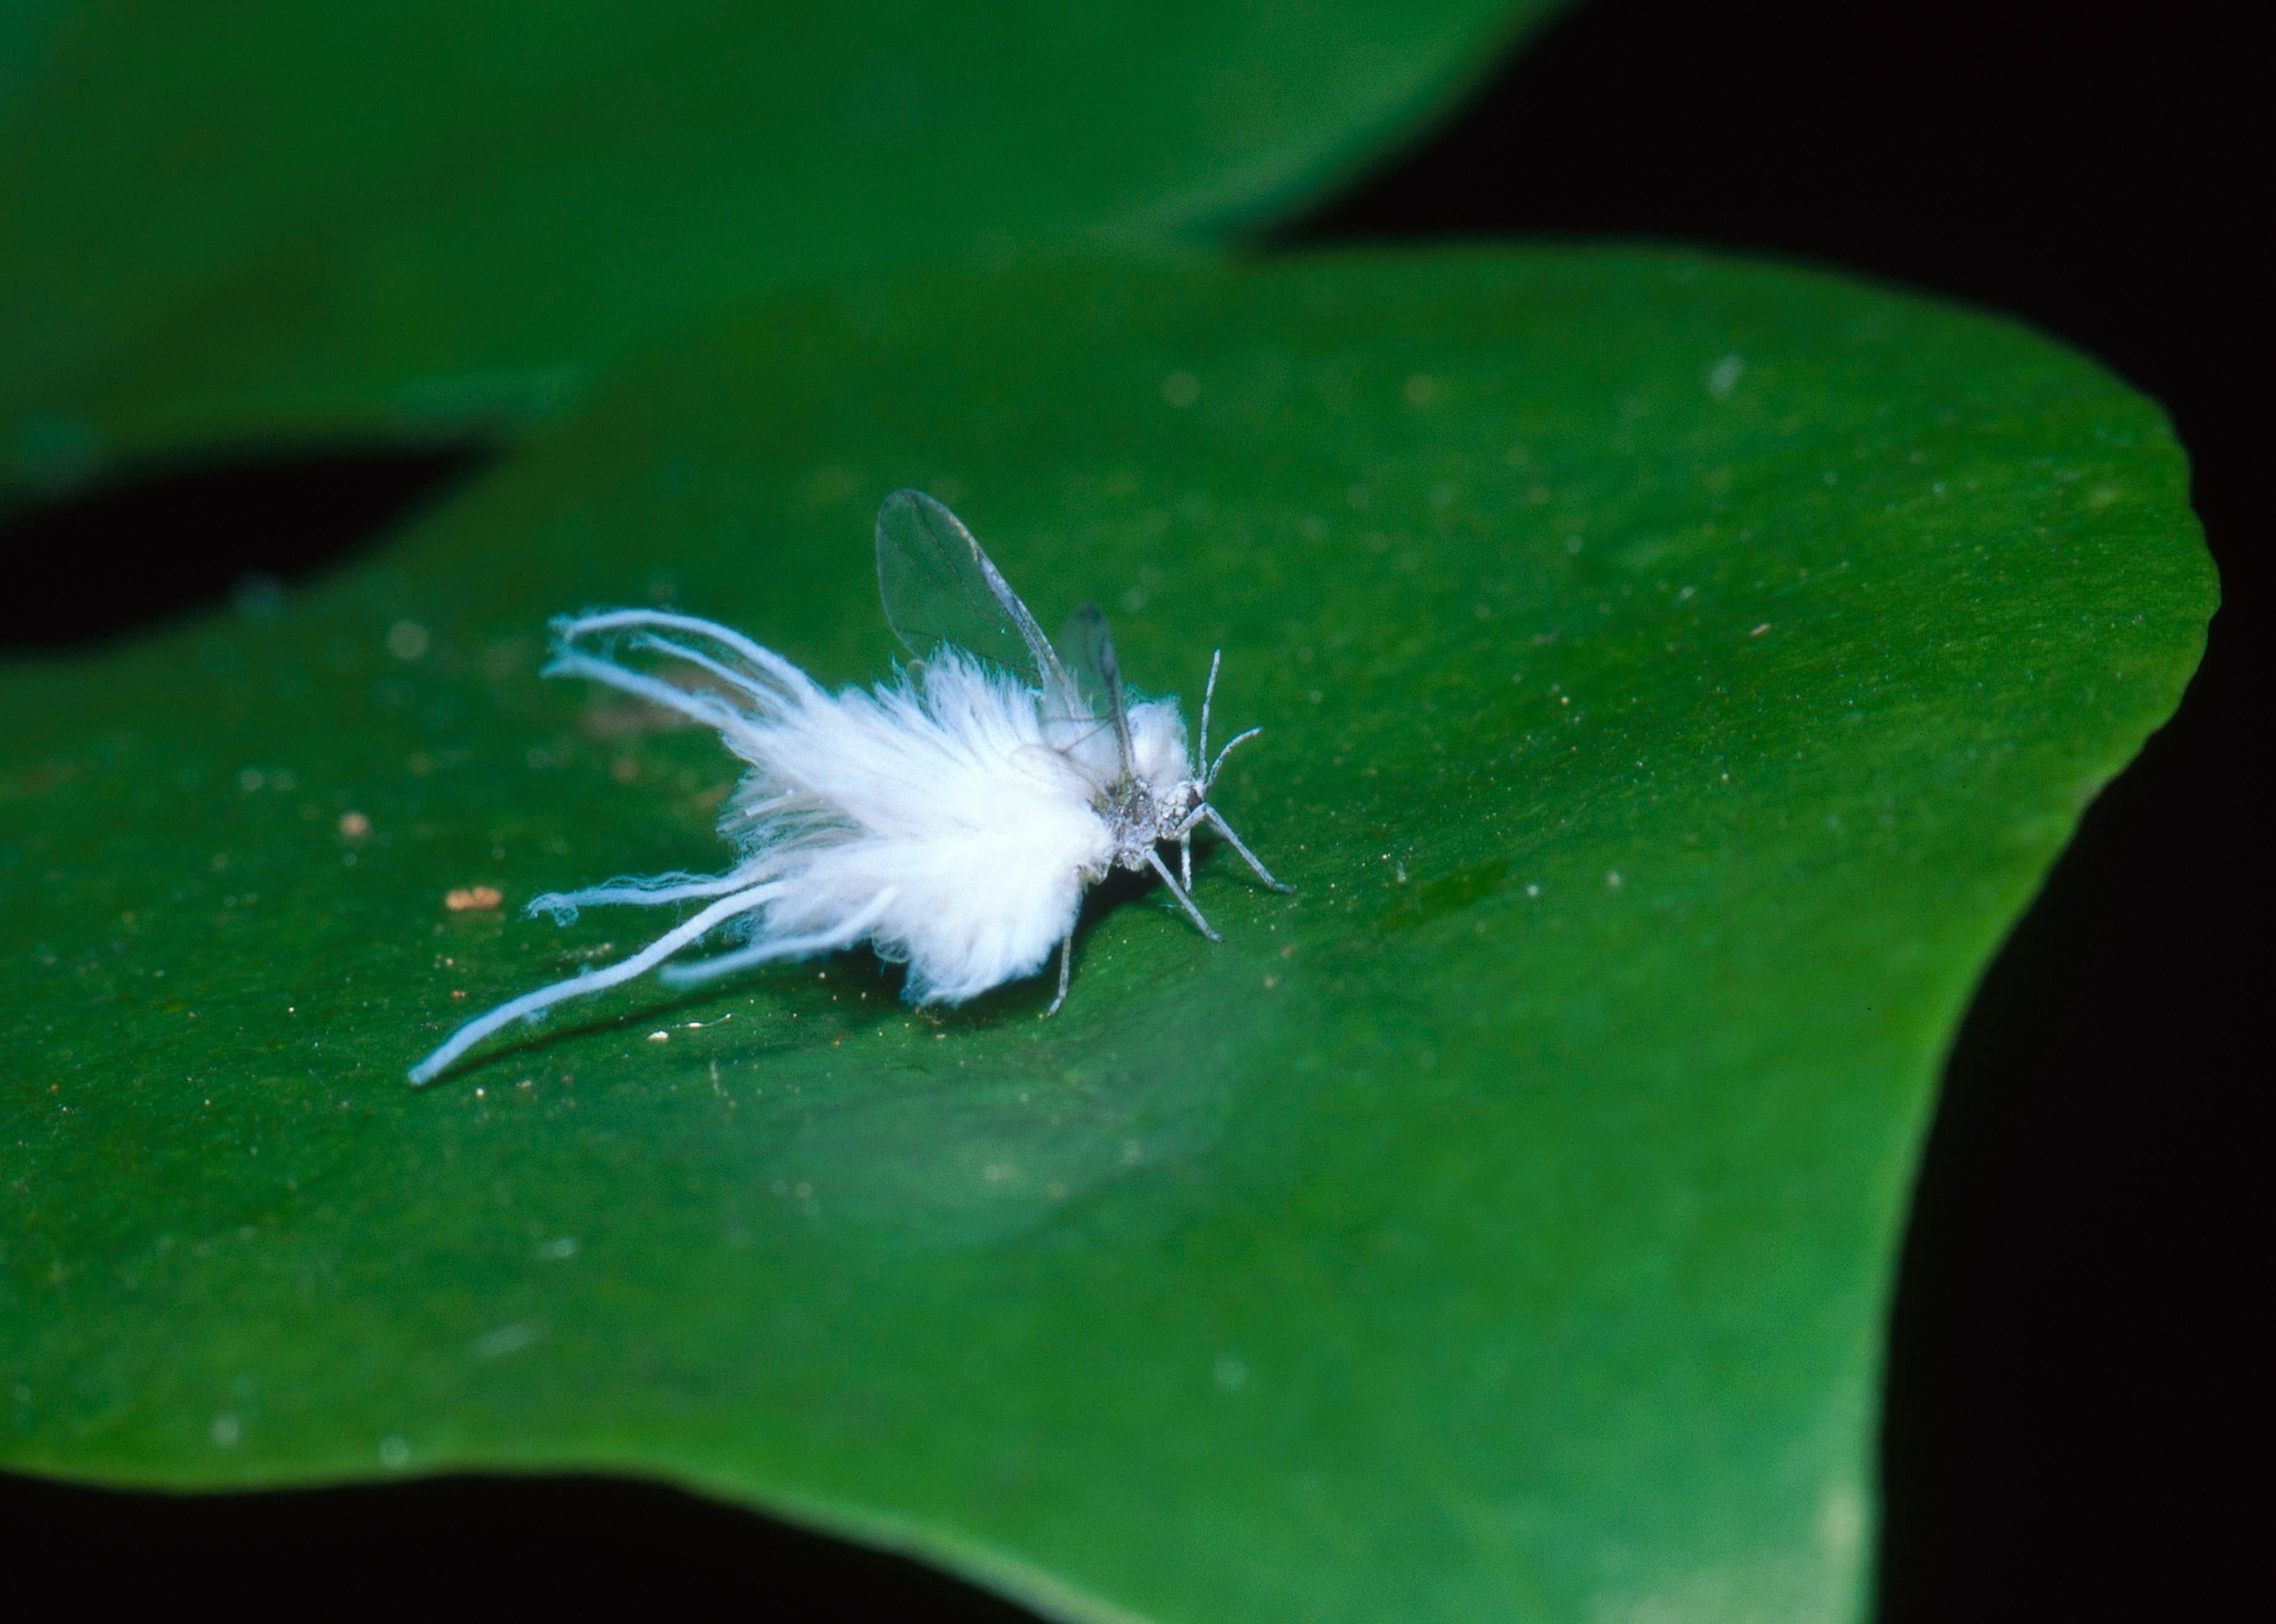 Woolly Aphid Control: How to Get Rid of White Fluffy Bugs Appearing in the  Southeast